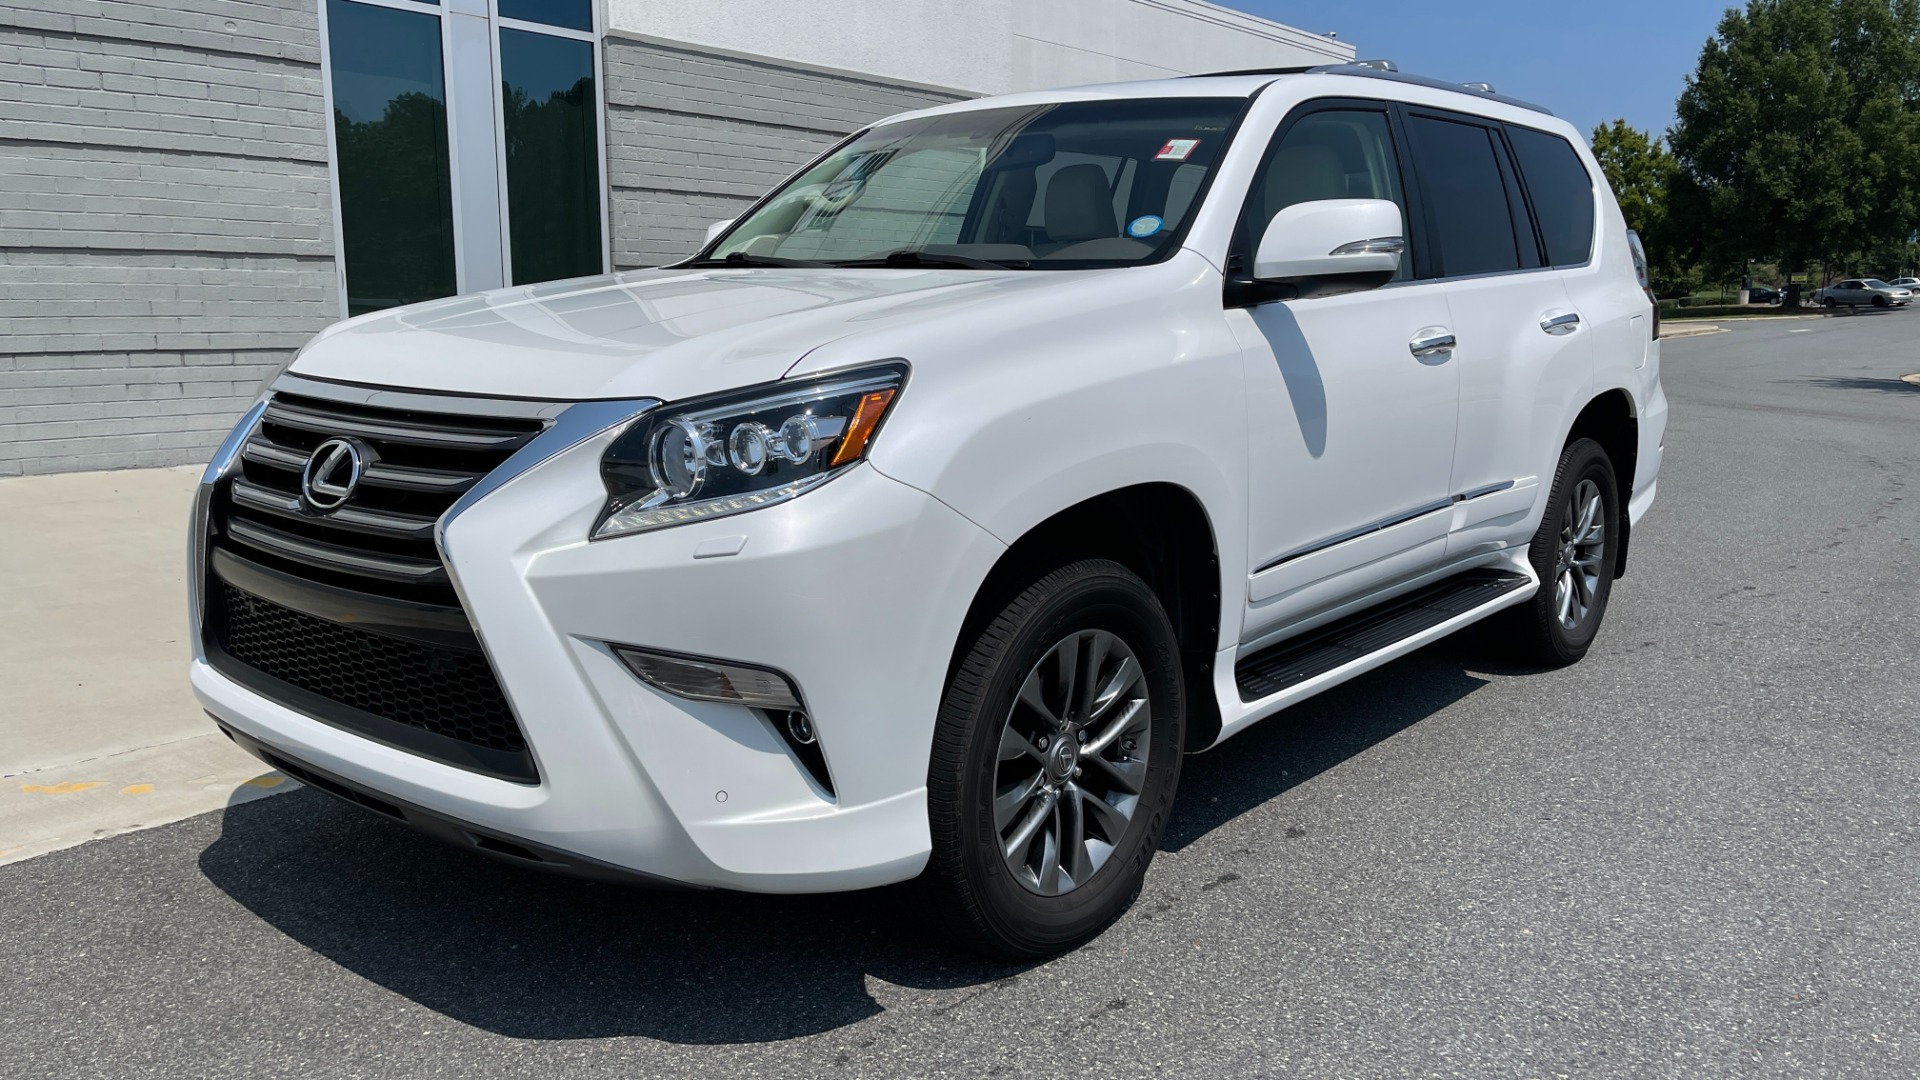 Used 2015 Lexus GX 460 LUXURY / 4.6L V8 / 4WD / NAV / SUNROOF / 3-ROW / REARVIEW for sale Sold at Formula Imports in Charlotte NC 28227 3